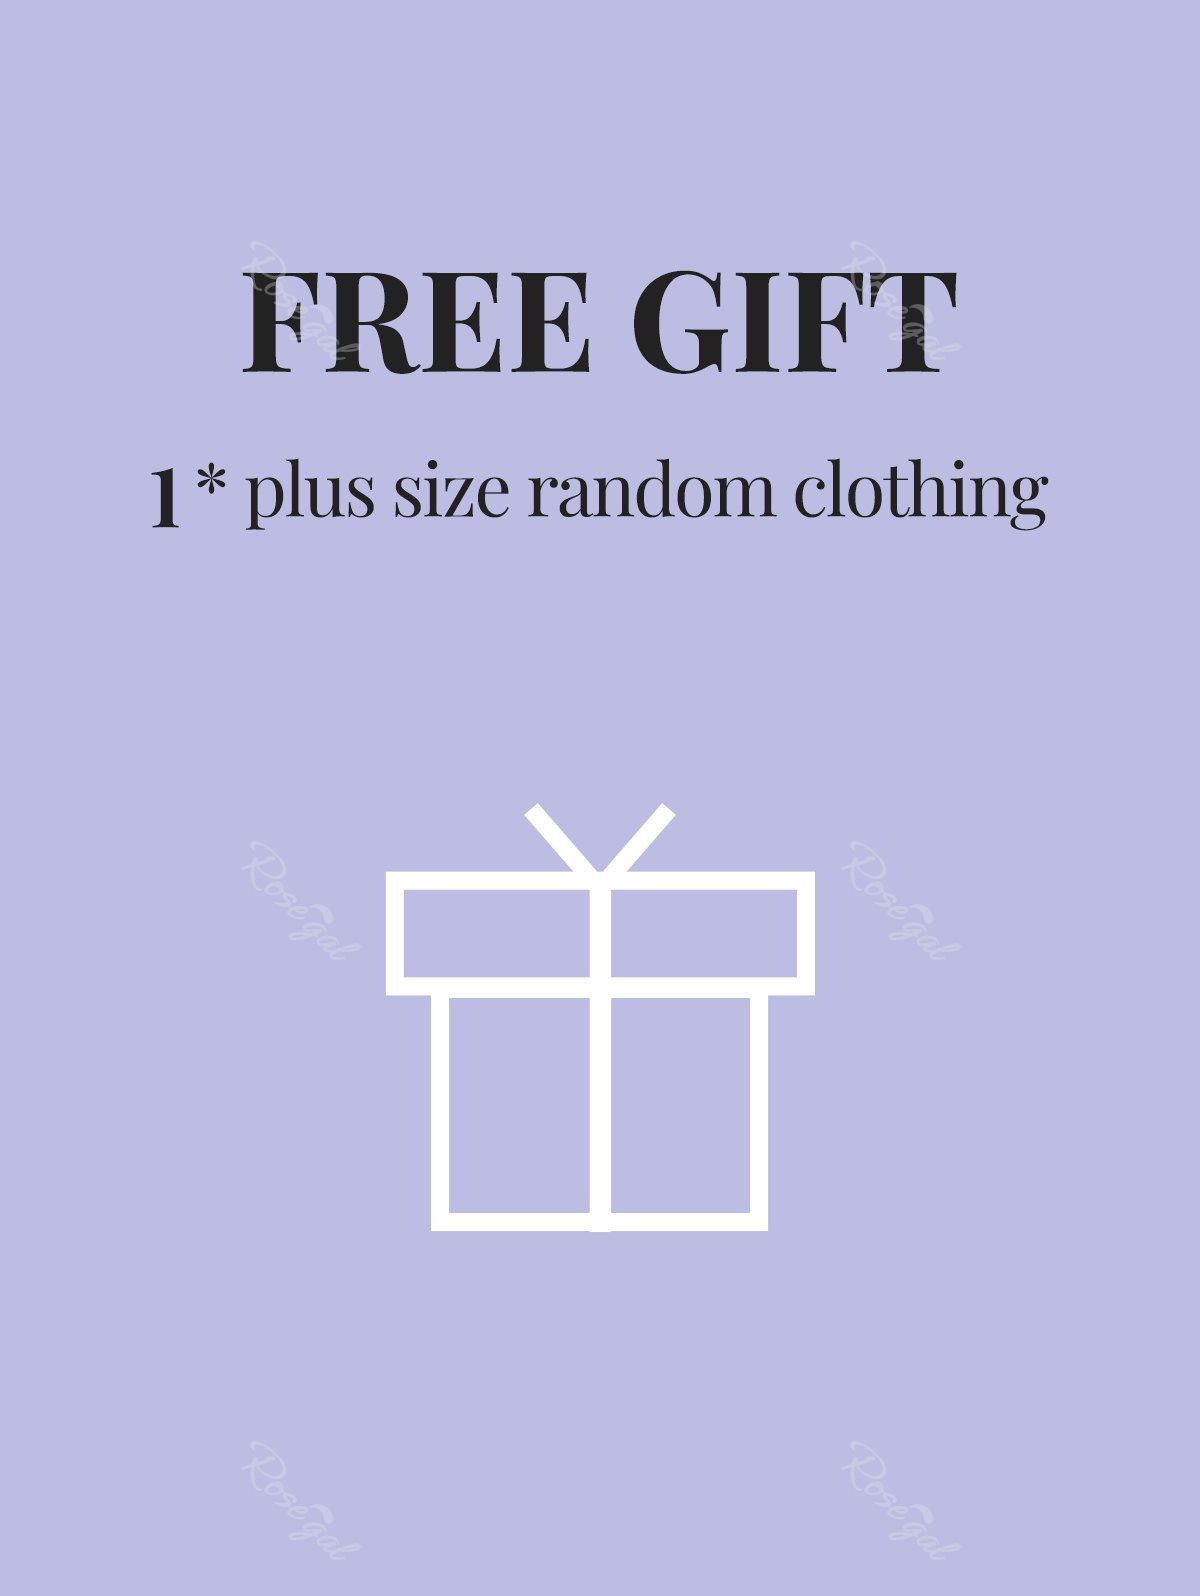 Unique ROSEGAL Free Gift - A Piece of Plus Size Random Clothing  